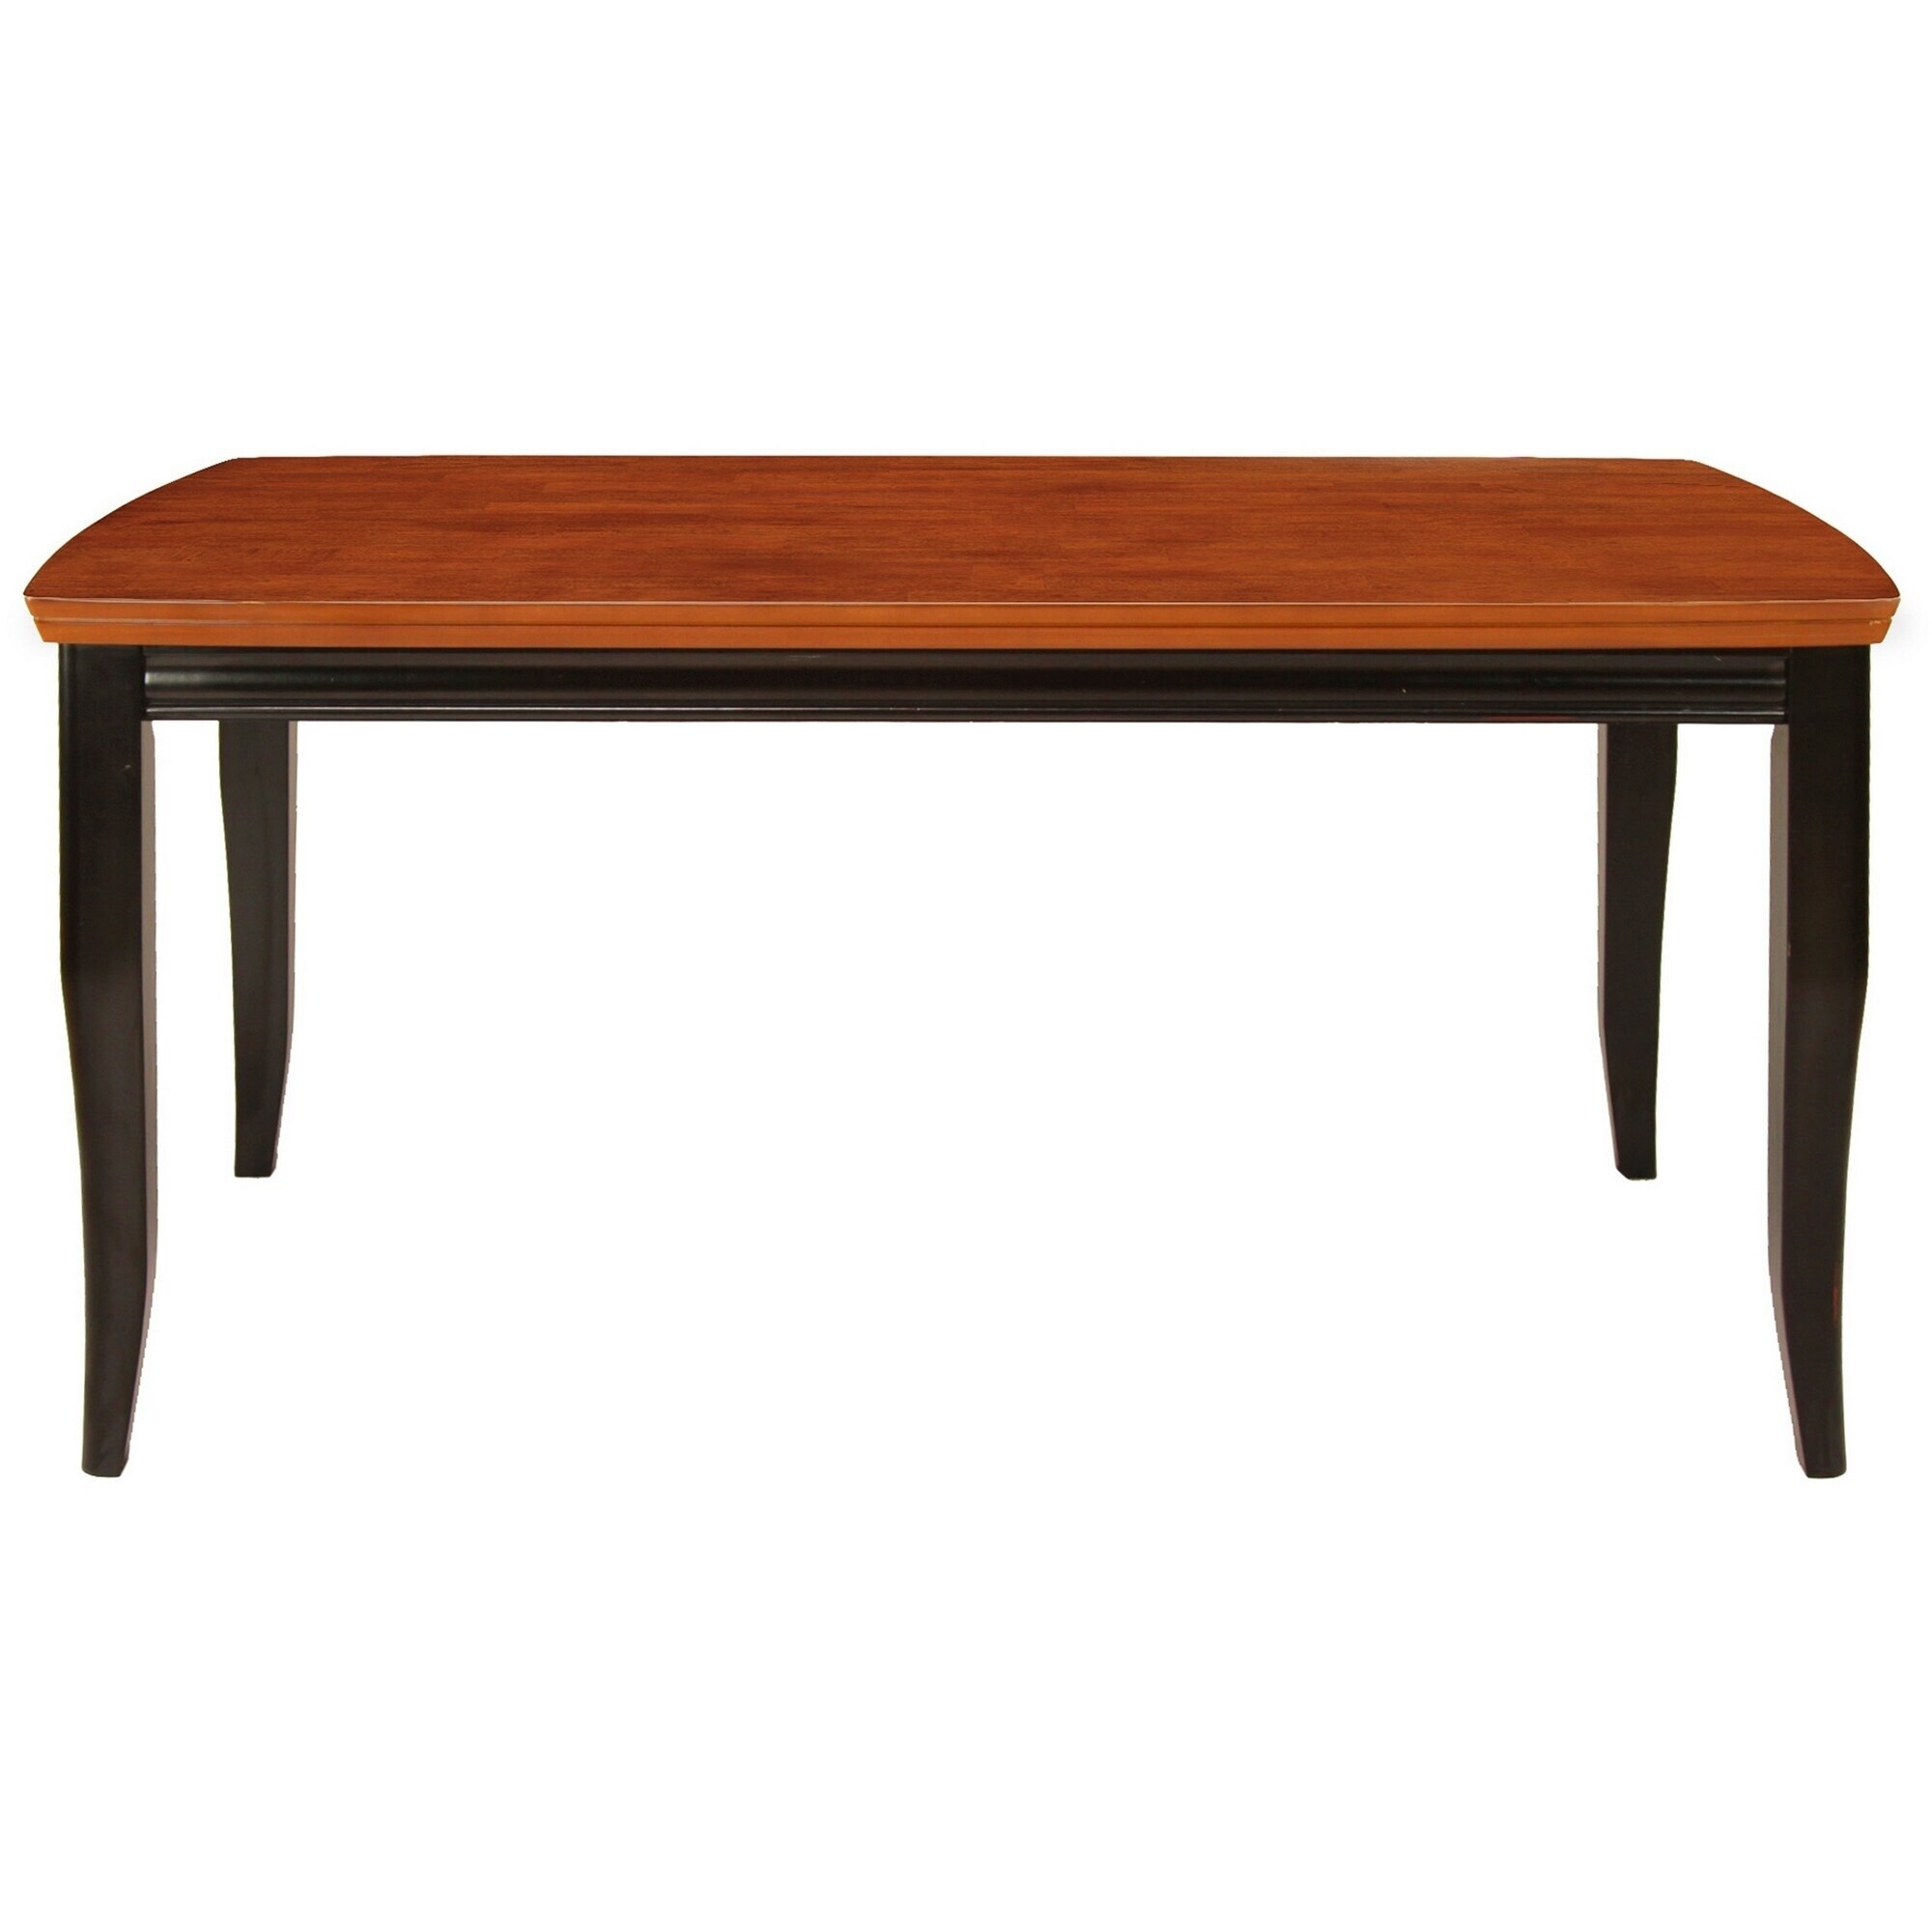 Furniture Of America Burwood Antique Solid Wood Dining Table